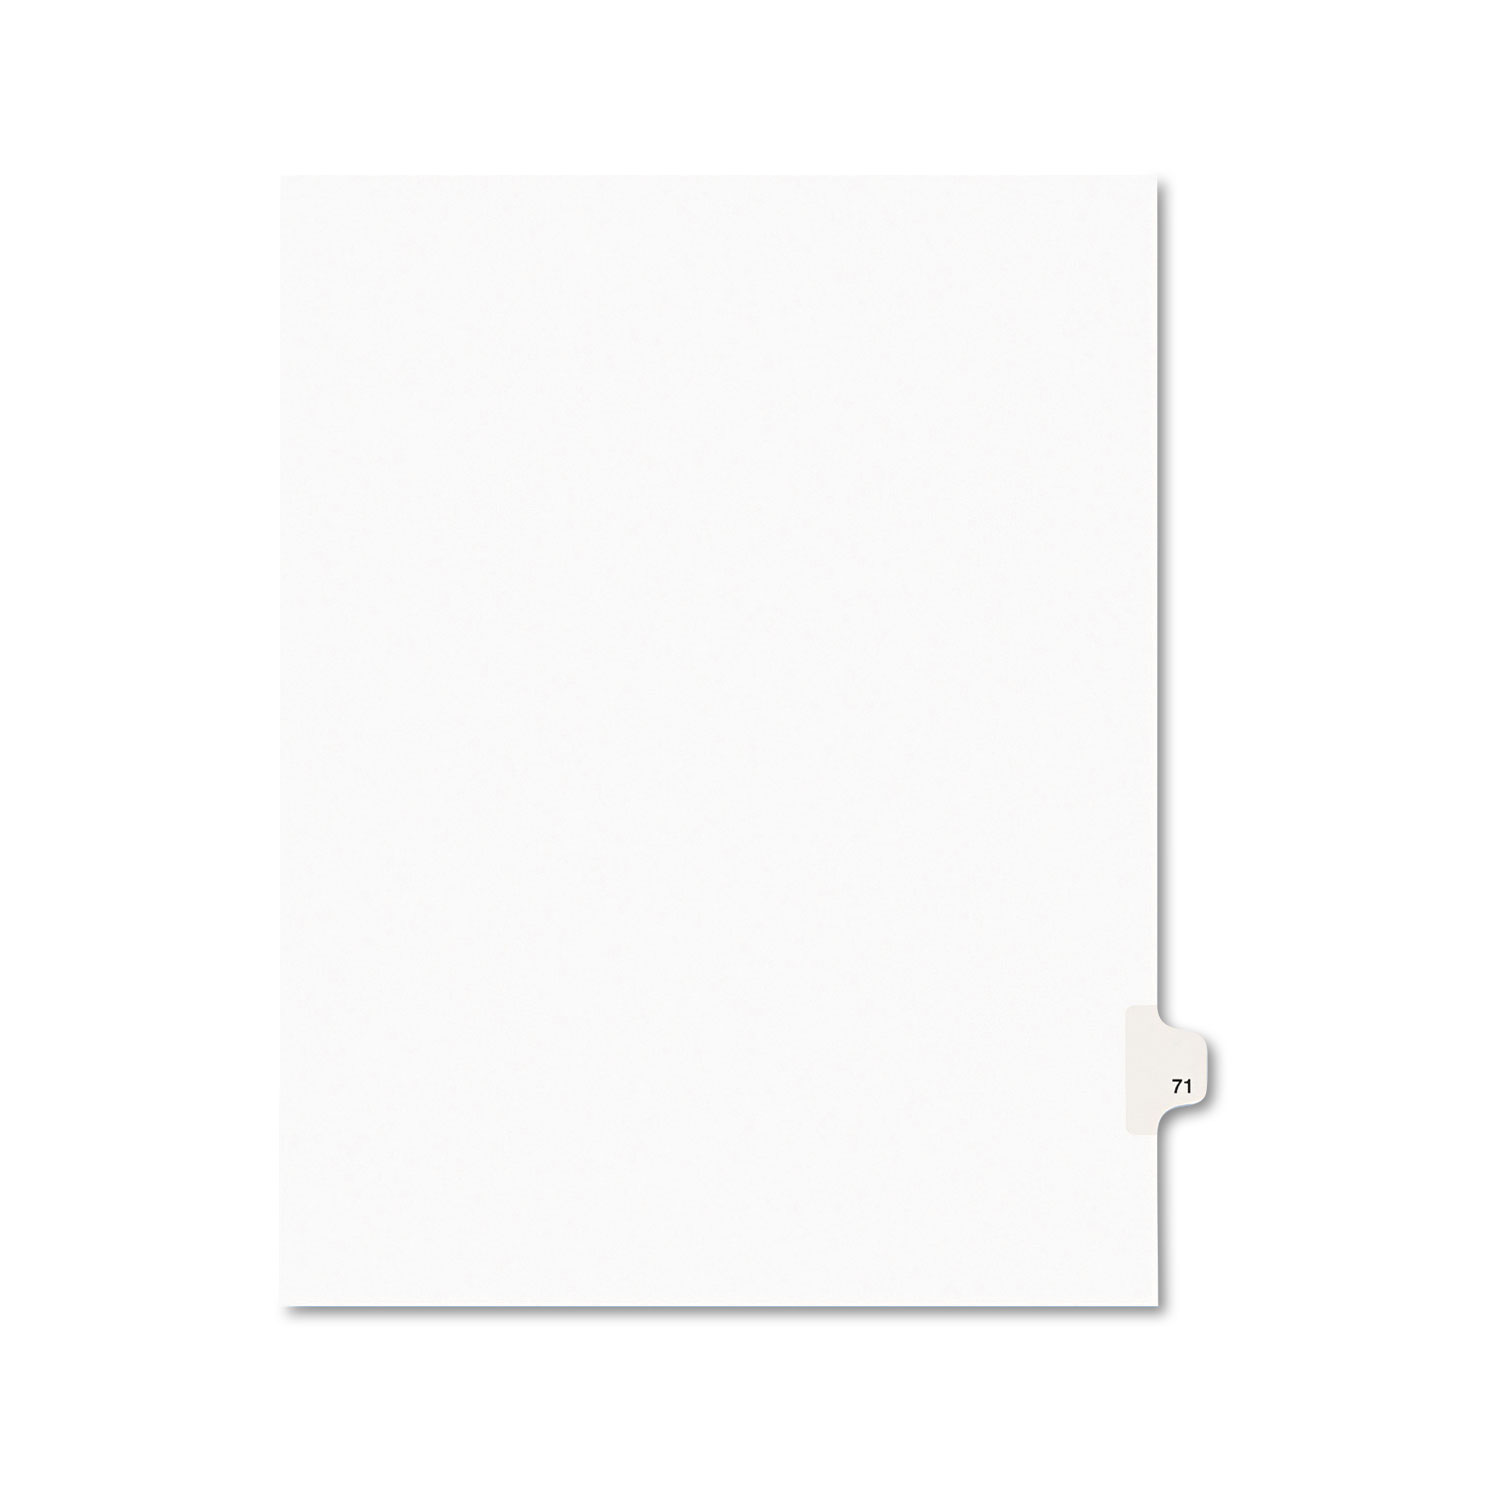  Avery 01071 Preprinted Legal Exhibit Side Tab Index Dividers, Avery Style, 10-Tab, 71, 11 x 8.5, White, 25/Pack (AVE01071) 